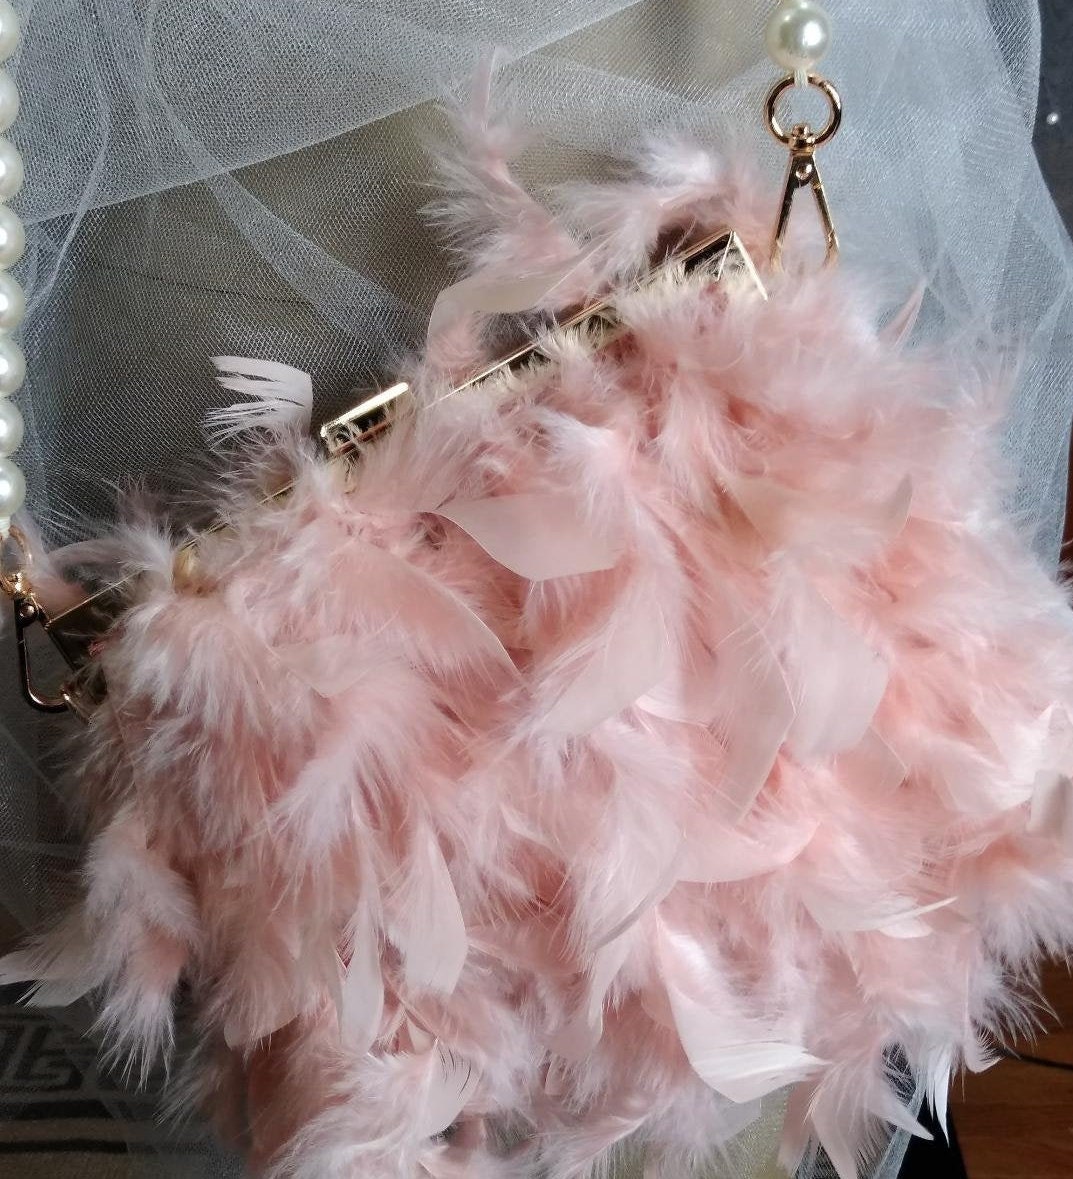 GOKTOW Feather Clutches Purses for Women Bag,Pearl Fluffy Evening Handbags for Wedding Anniversary Party